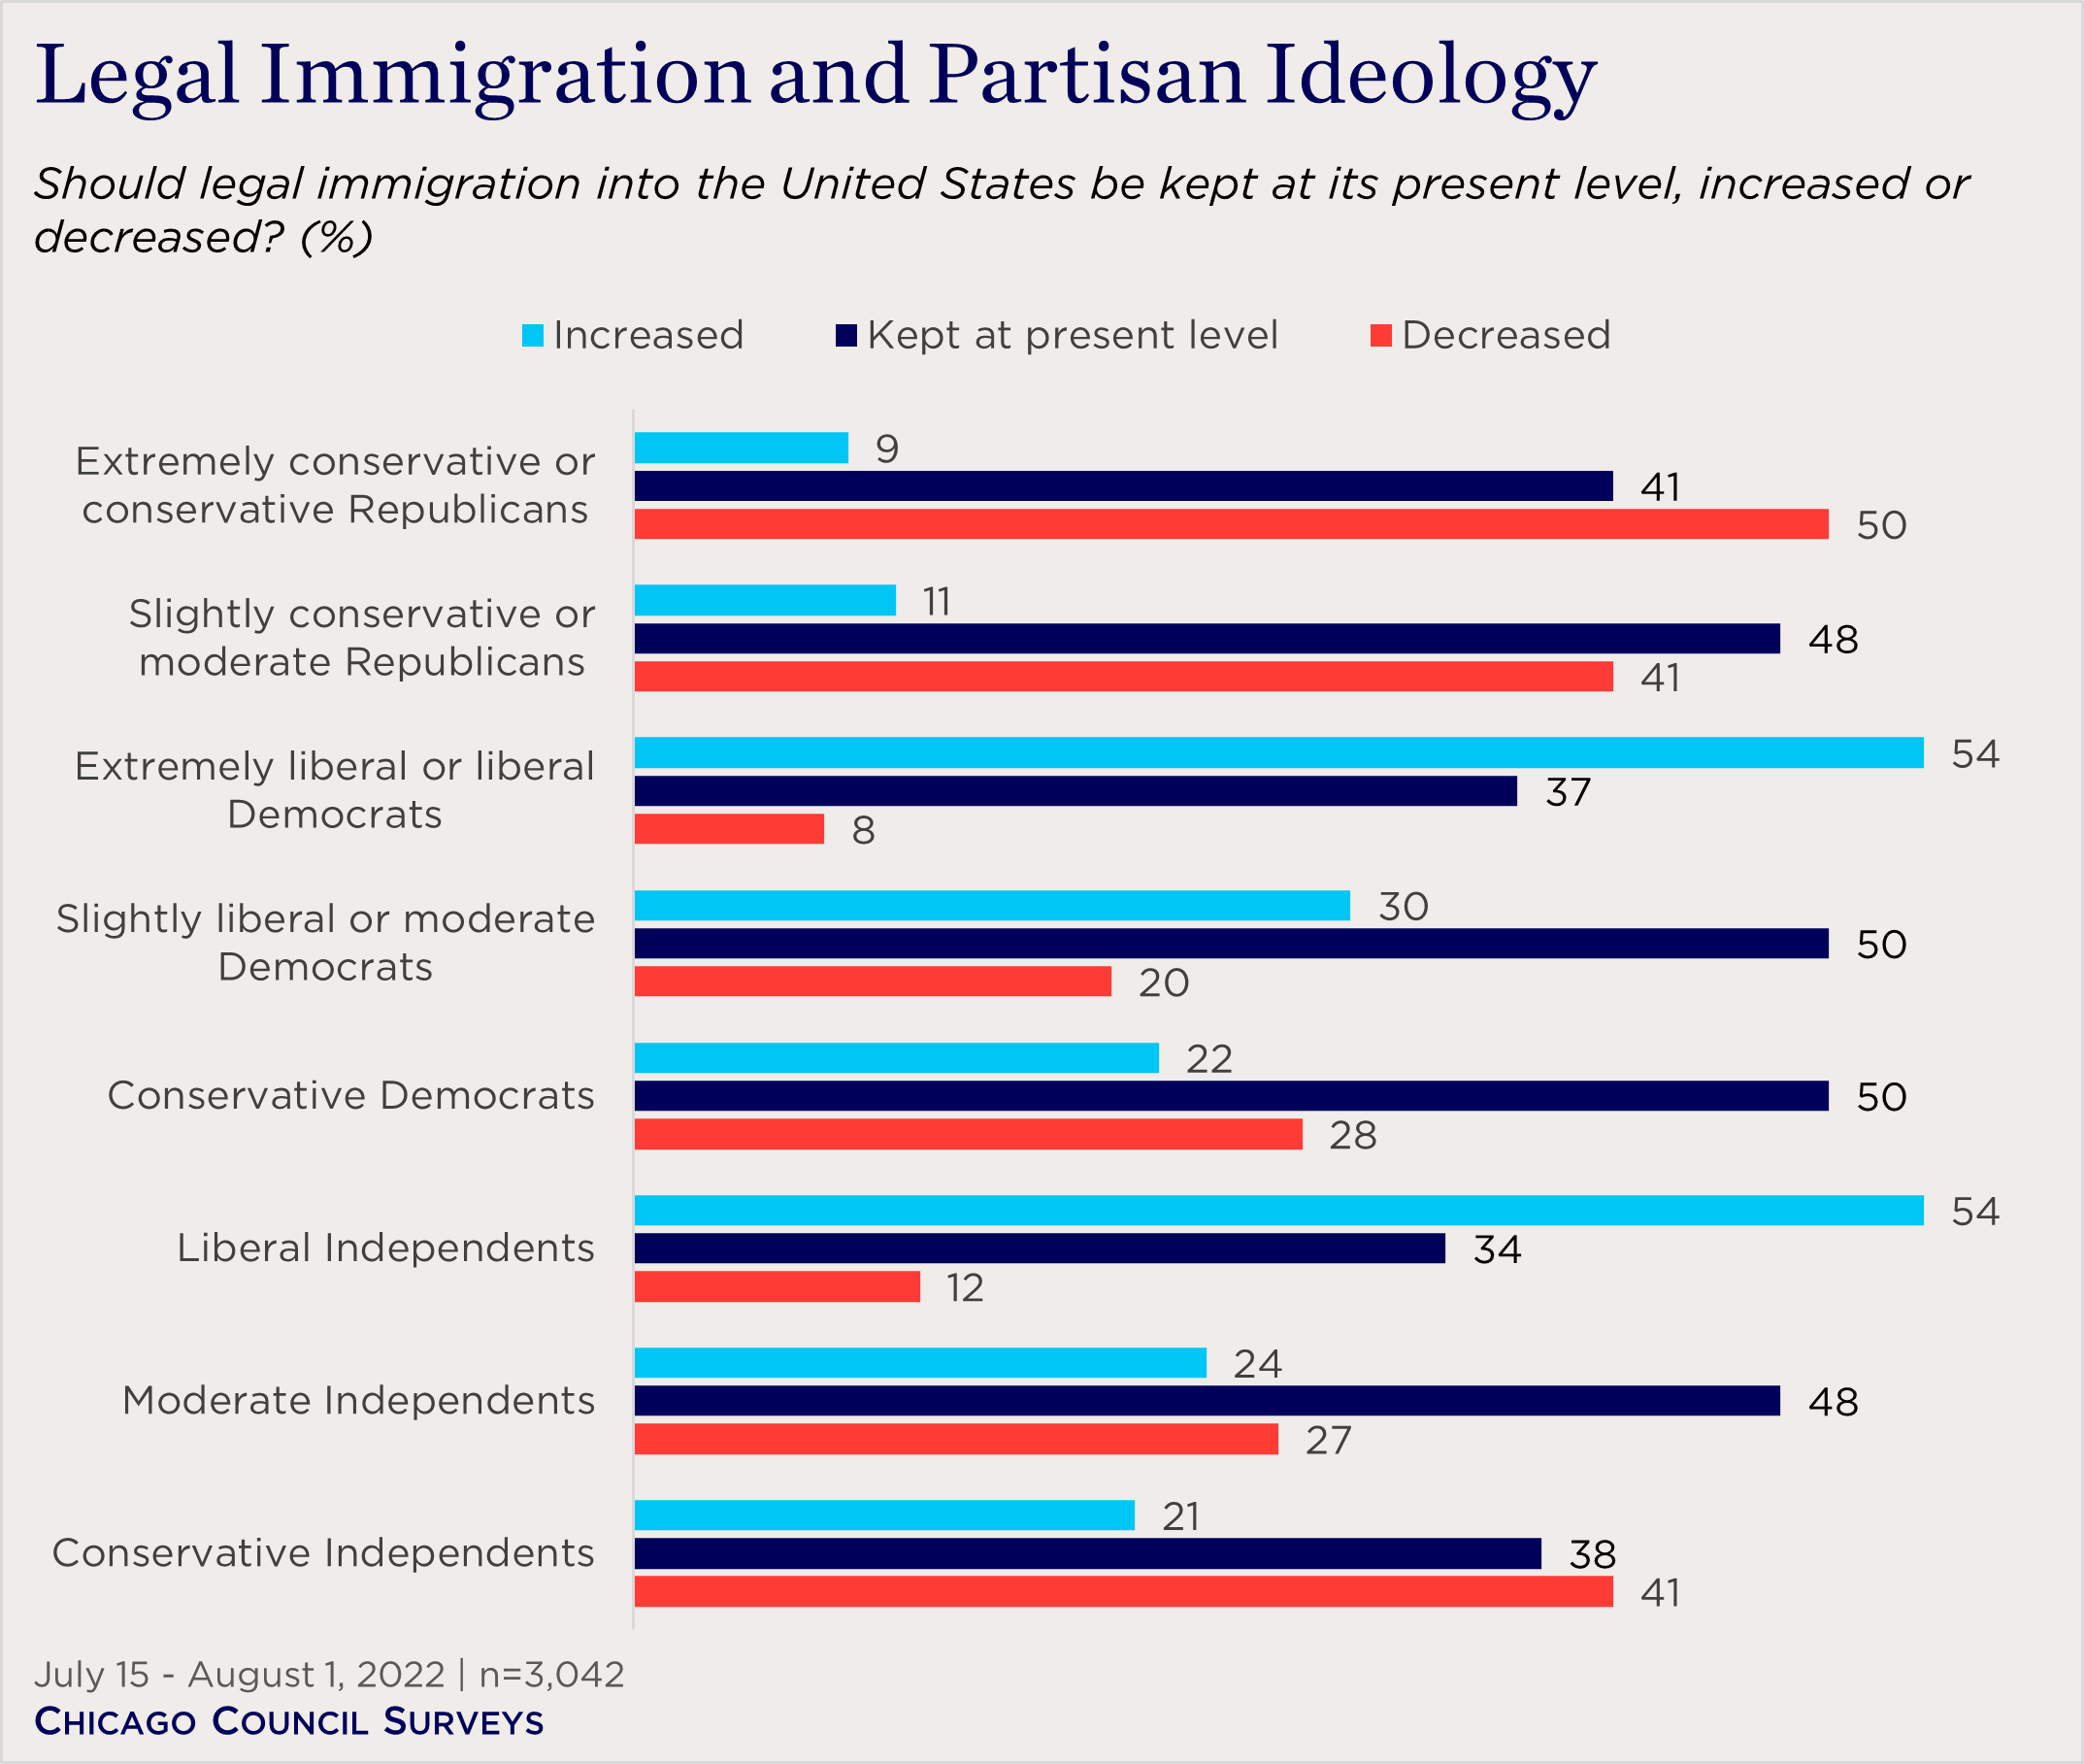 "bar chart showing views on legal immigration by partisan ideology"